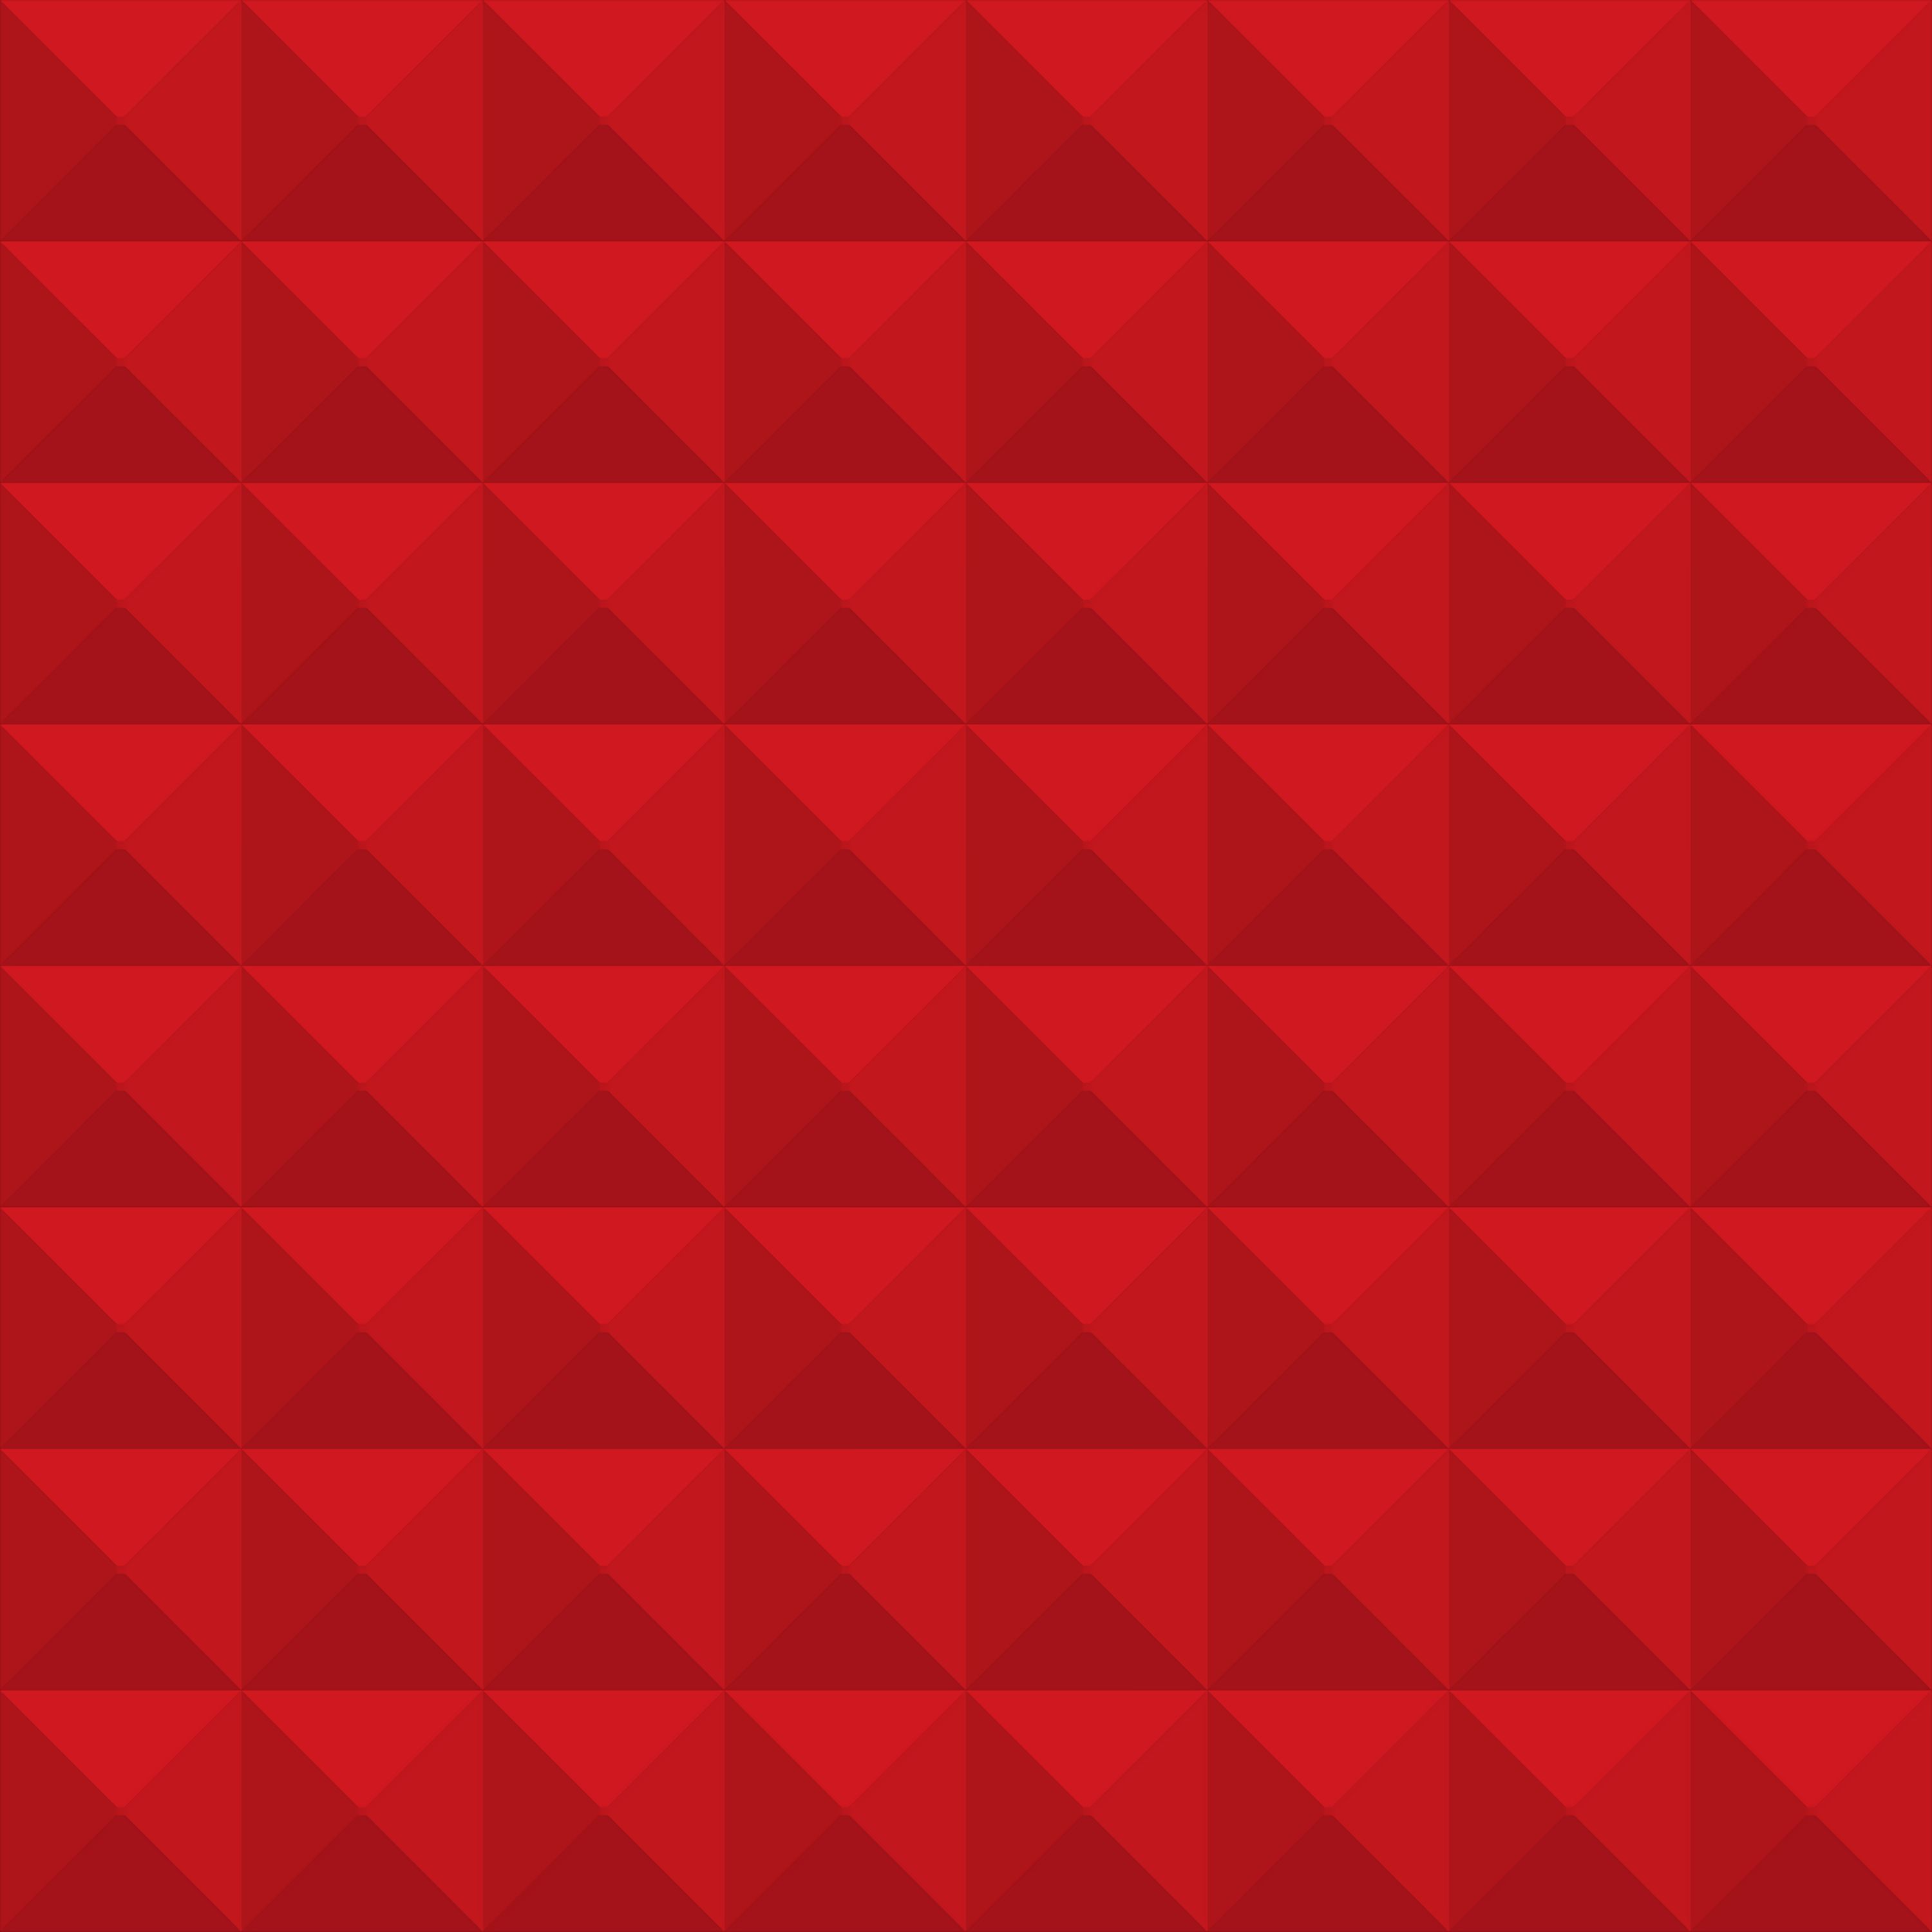 geometric, texture, textures, red, pattern, relief, symmetry, shades, squares, raised, triangles